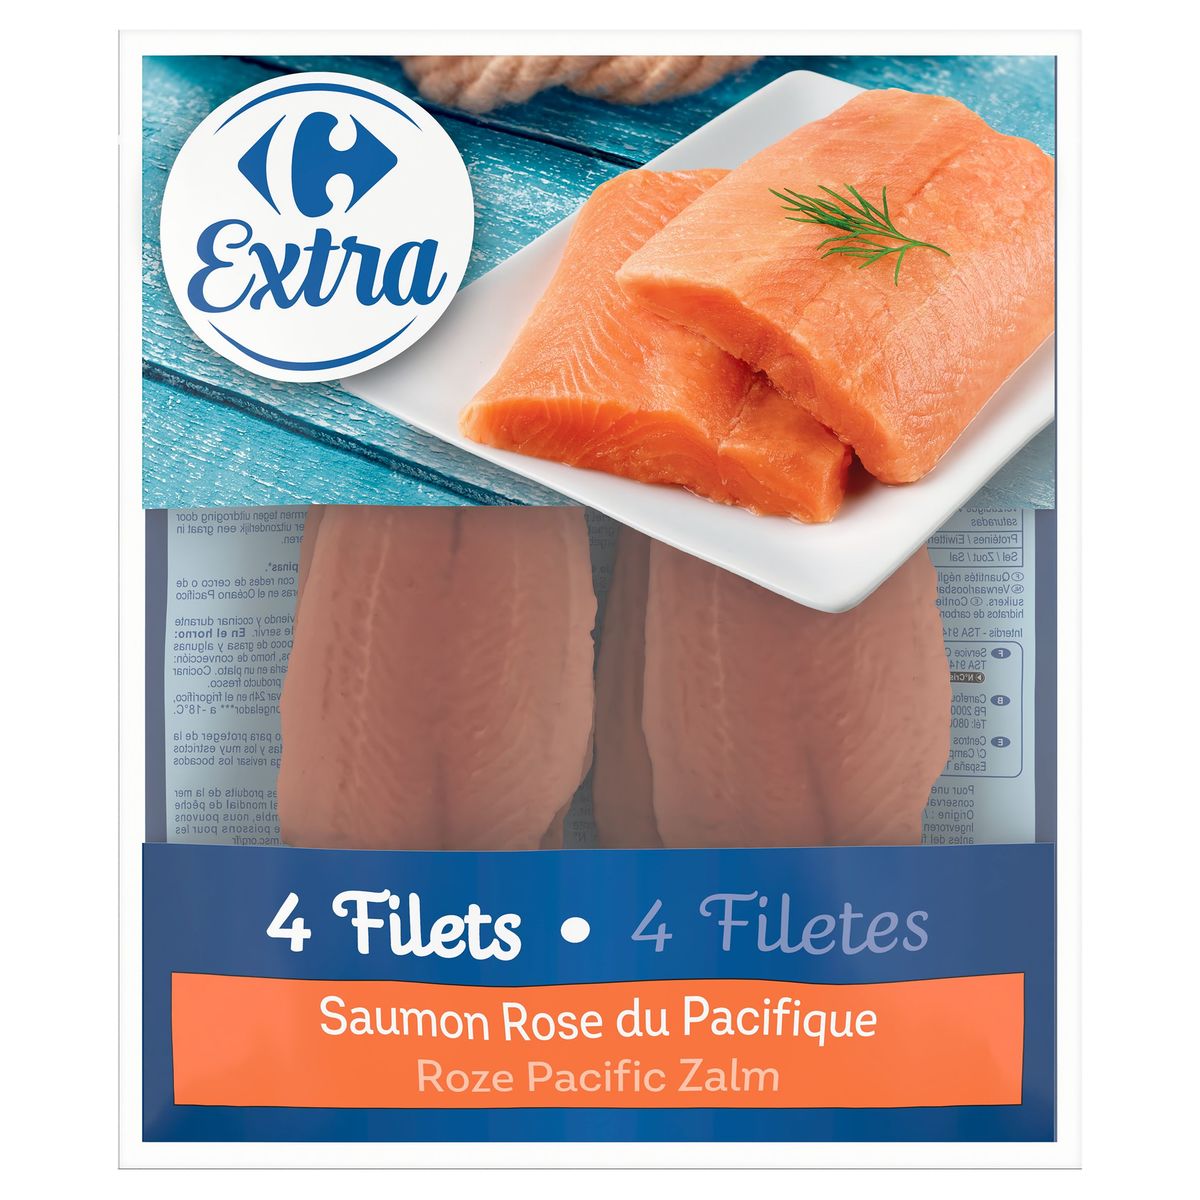 Carrefour Extra Roze Pacific Zalm 480 g